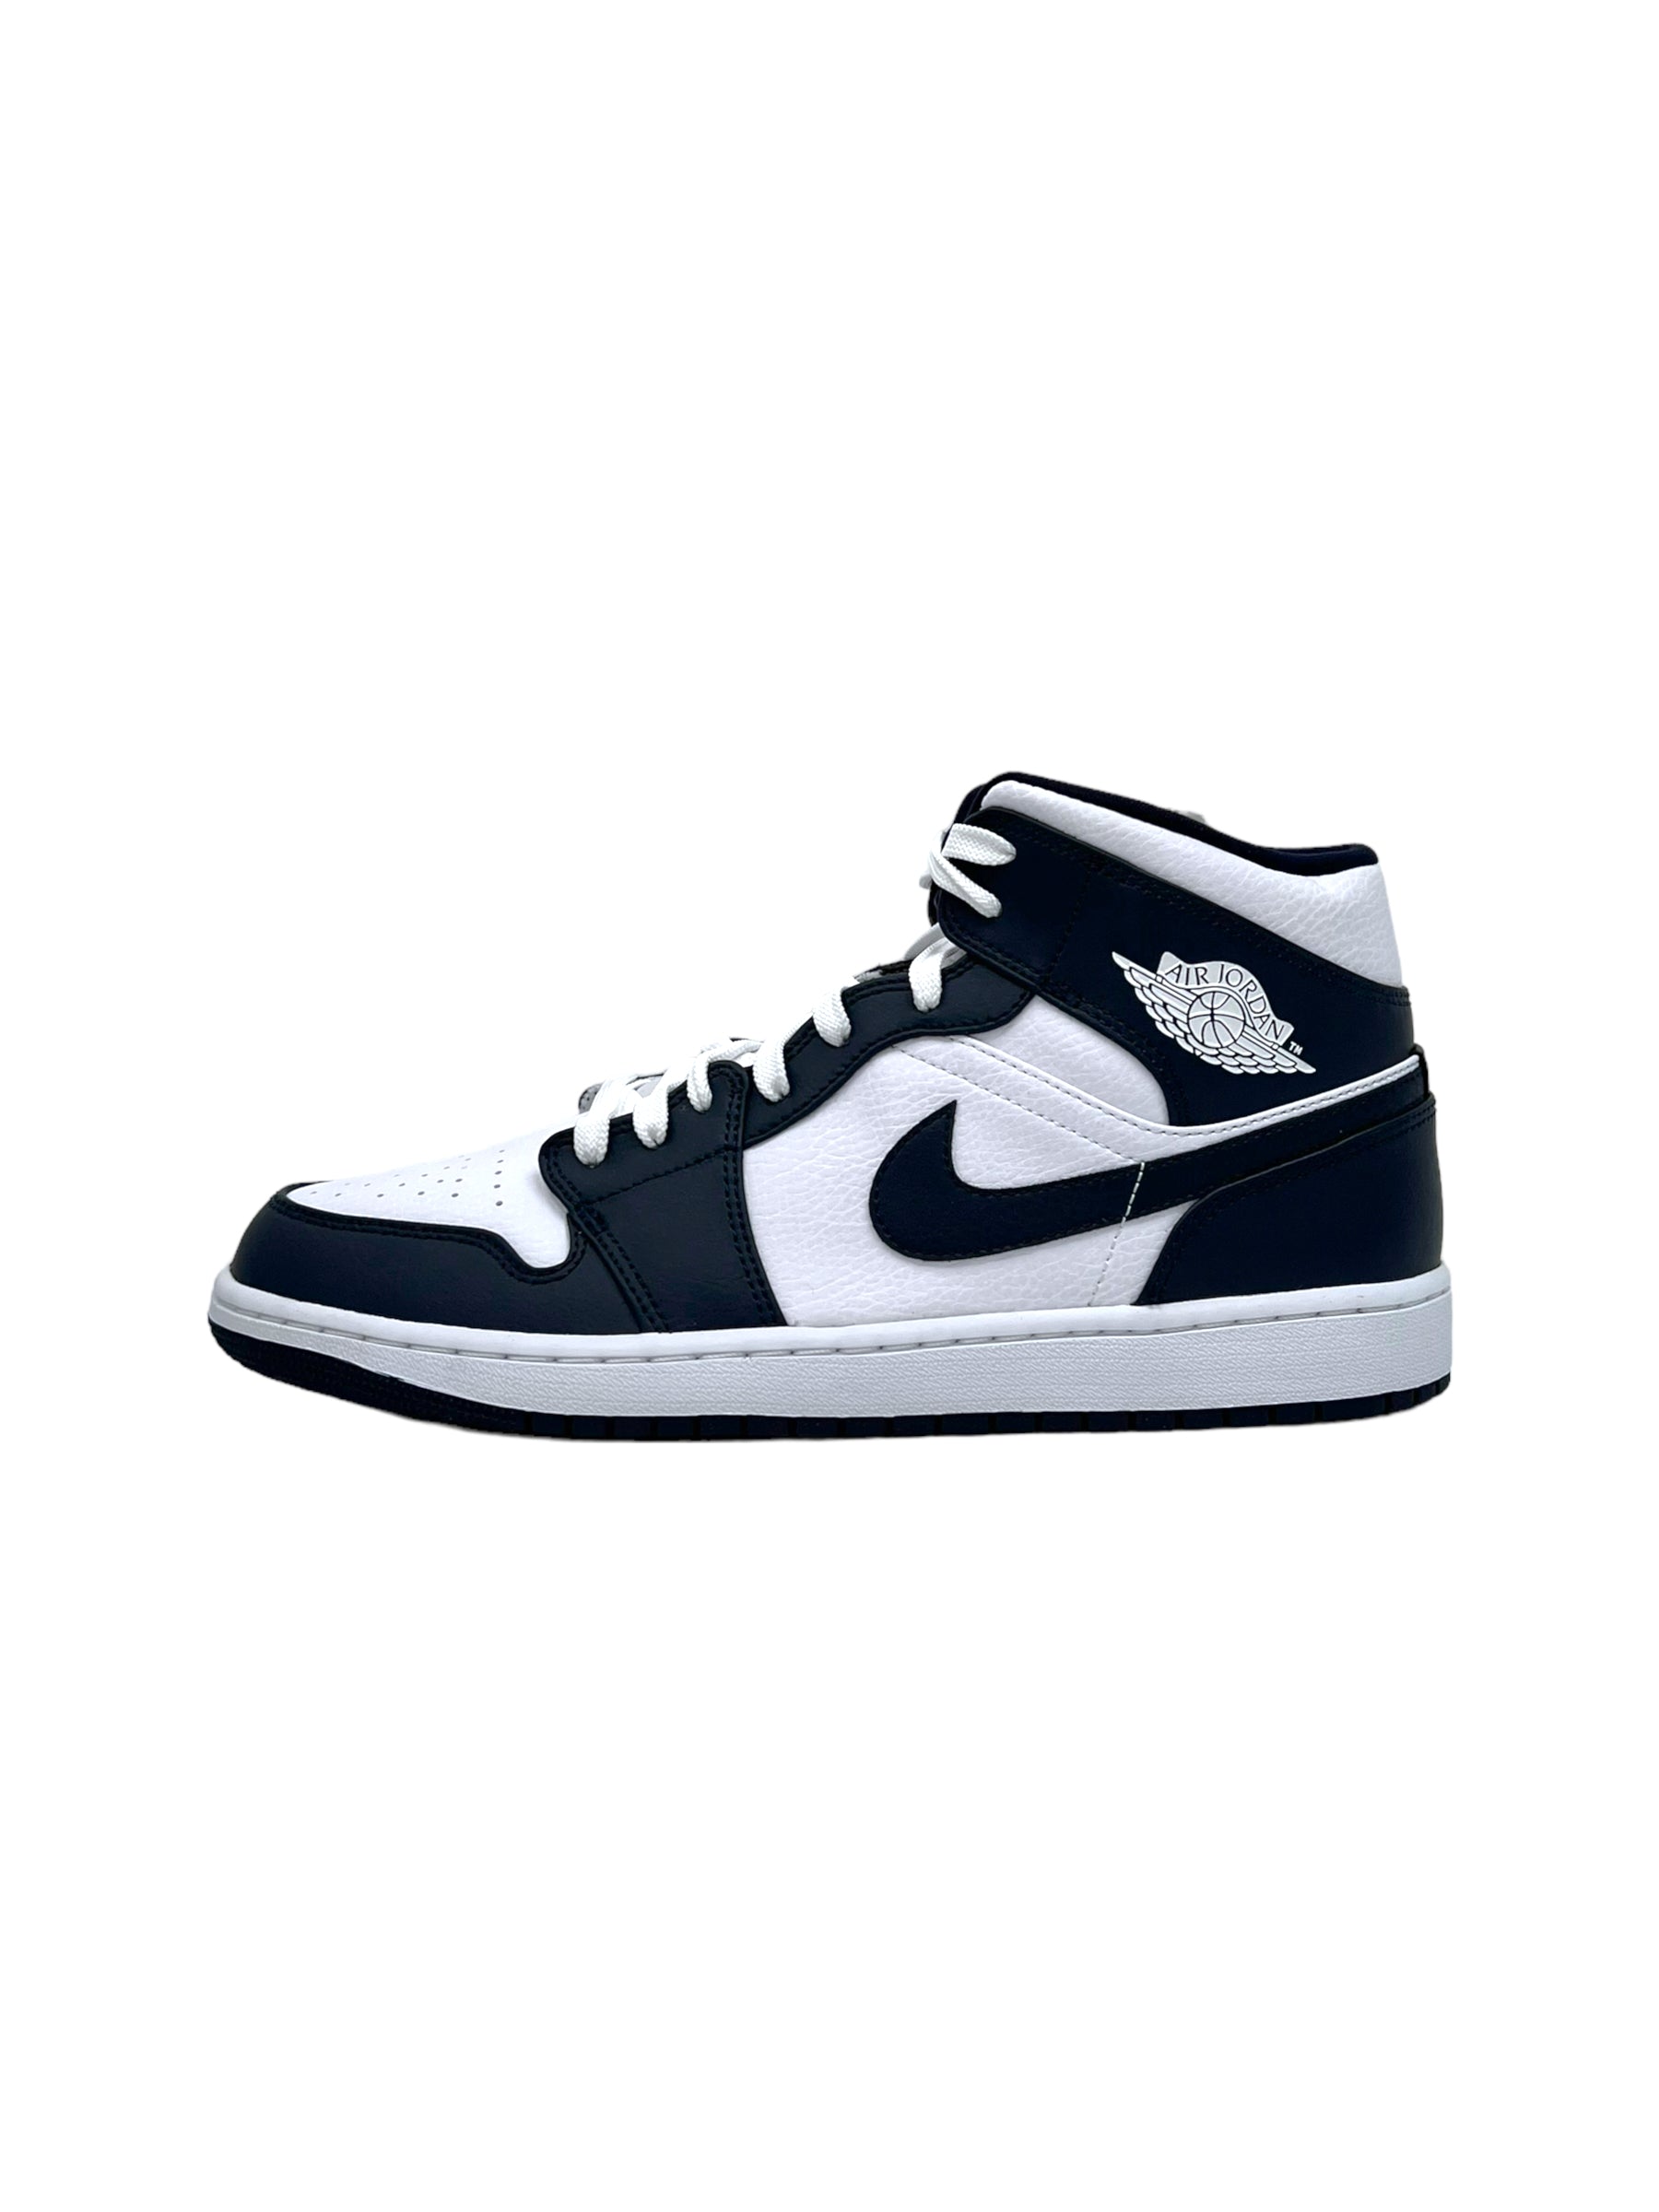 Nike Air Jordan 1 Mid Obsidian Sneakers - Genuine Design Luxury Consignment Calgary, Alberta, Canada New and Pre-Owned Clothing, Shoes, Accessories.